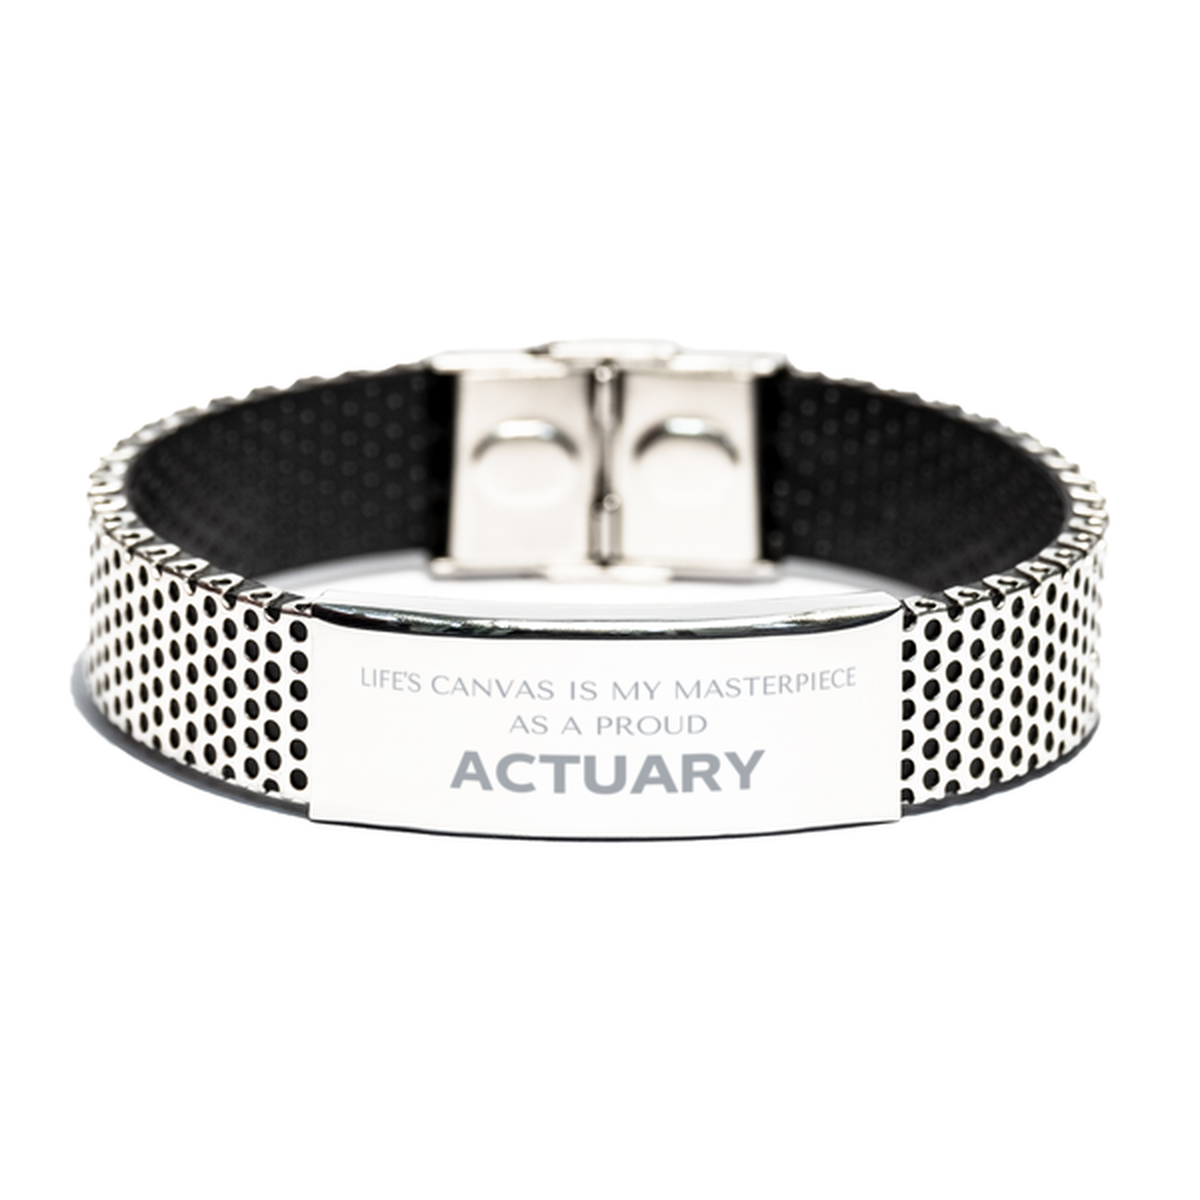 Proud Actuary Gifts, Life's canvas is my masterpiece, Epic Birthday Christmas Unique Stainless Steel Bracelet For Actuary, Coworkers, Men, Women, Friends